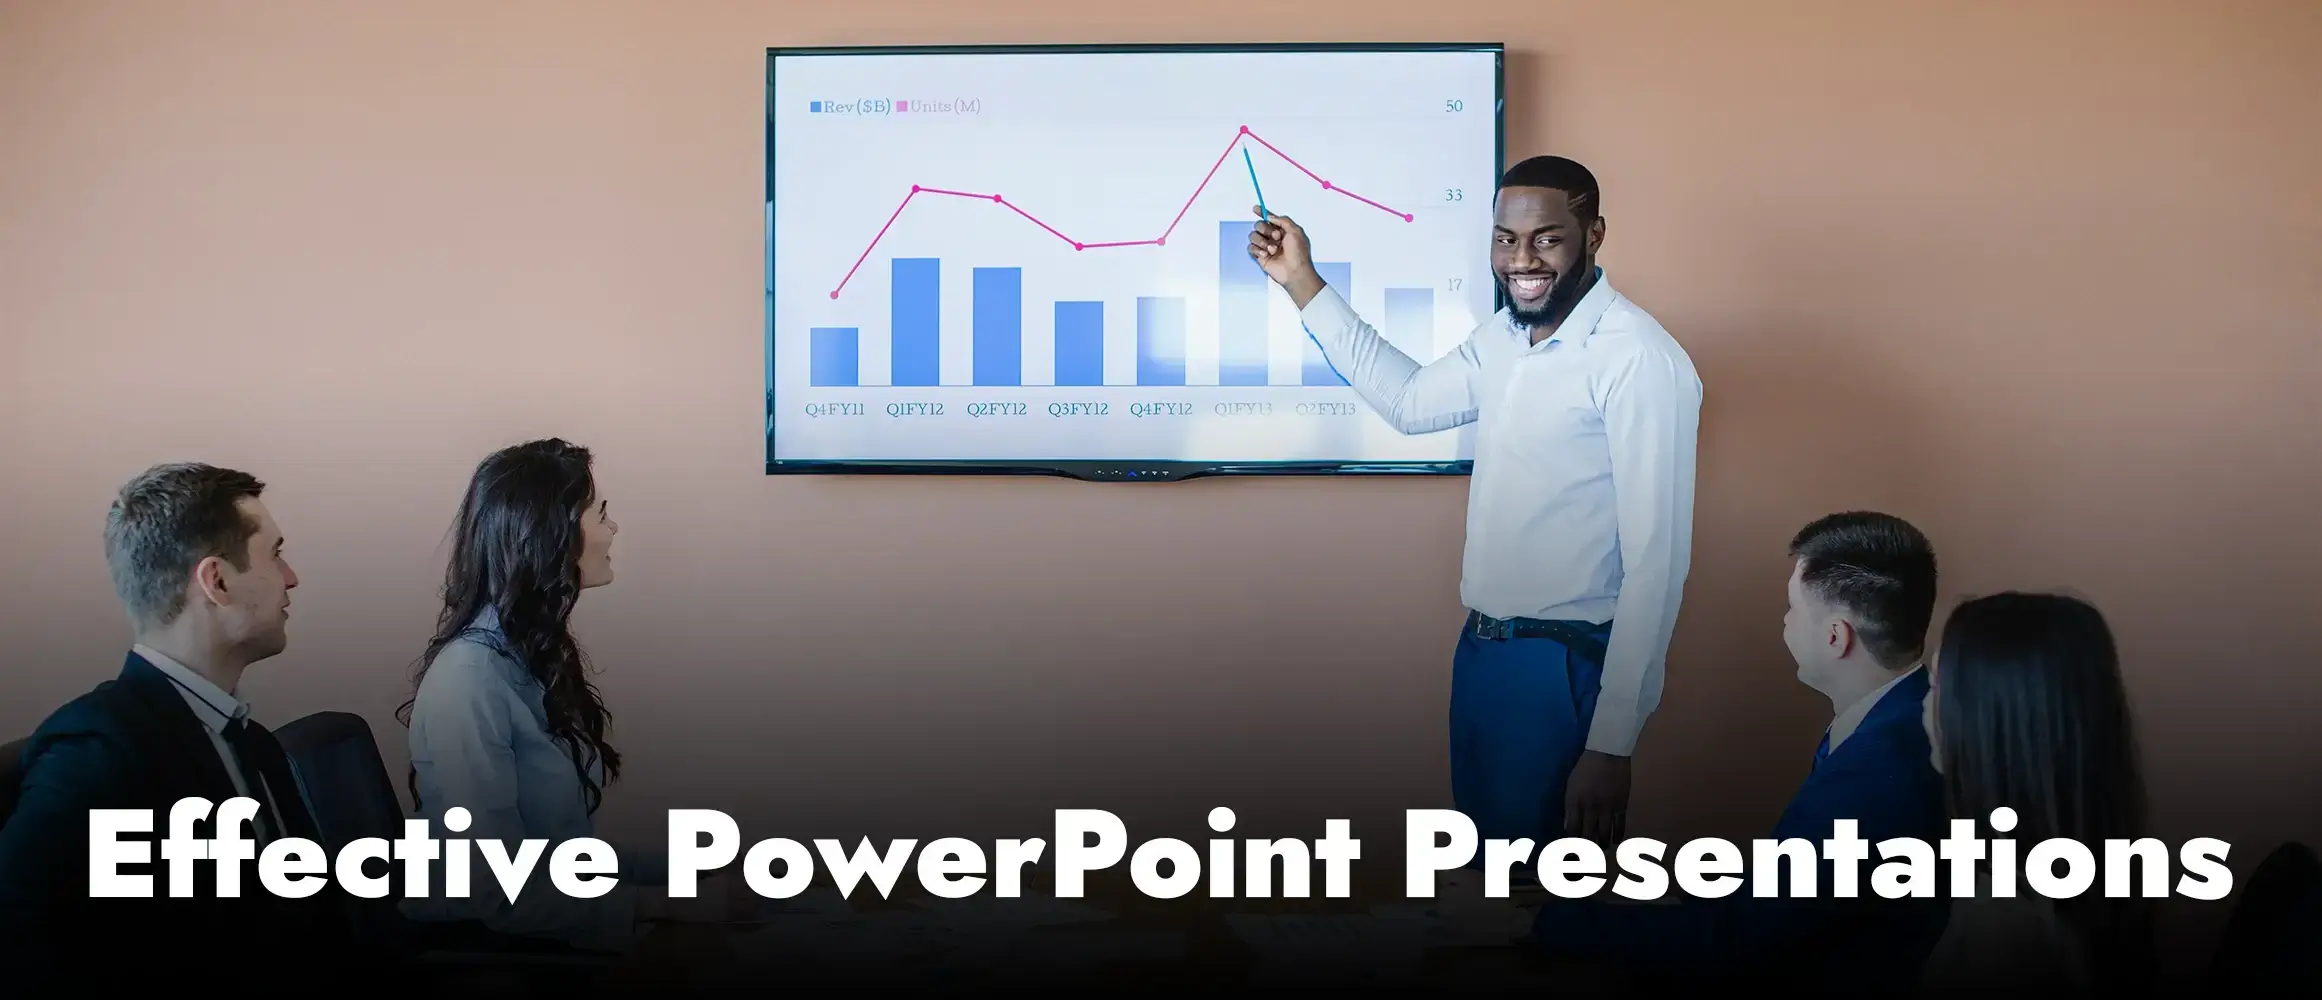 5 Steps to Create Effective PowerPoint Presentations